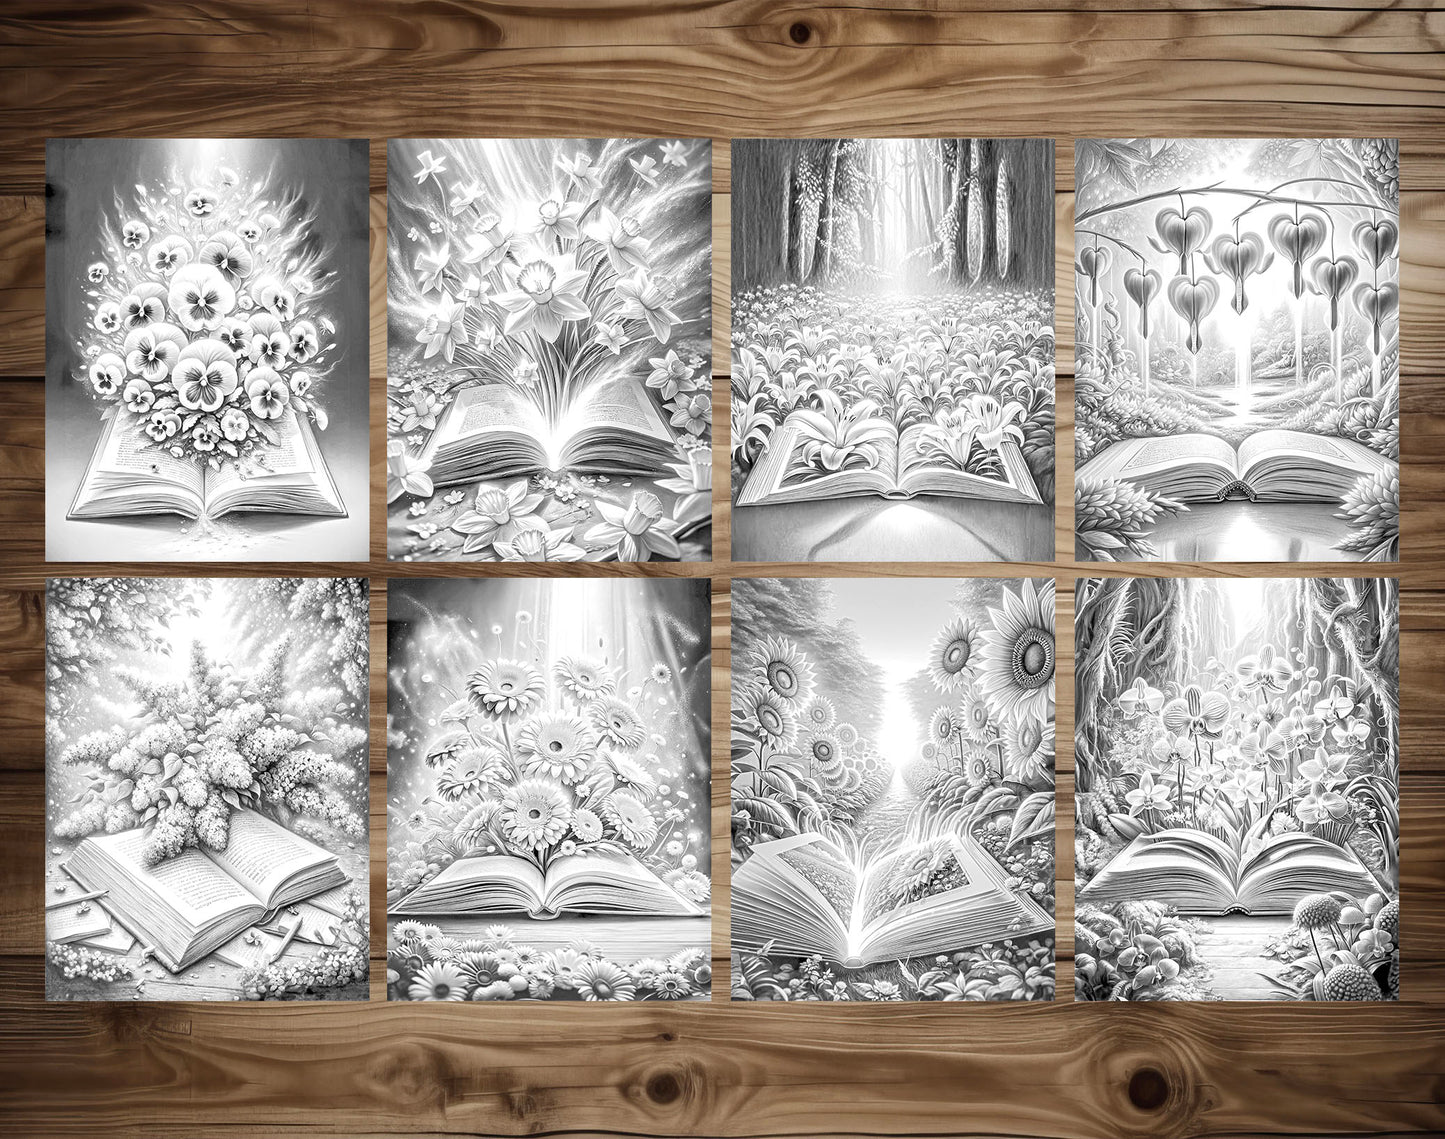 70 Open Magic Book - World of Flowers Grayscale Coloring Pages - Instant Download - Printable PDF Dark/Light